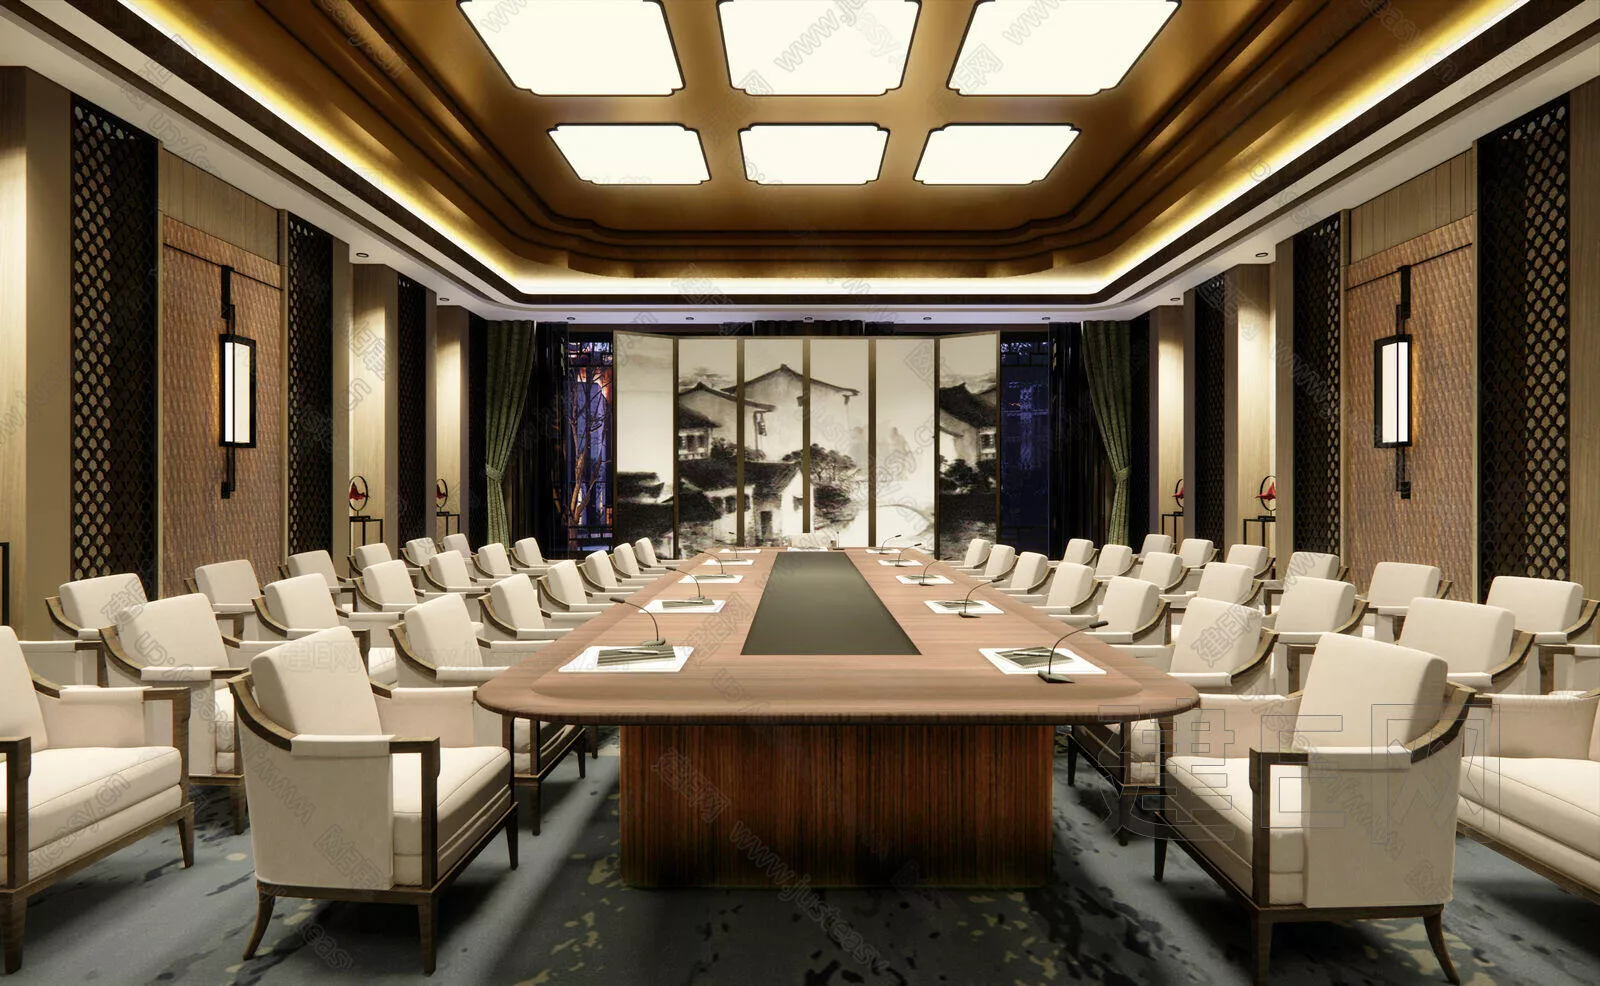 CHINESE MEETING ROOM - SKETCHUP 3D SCENE - ENSCAPE - 105792688